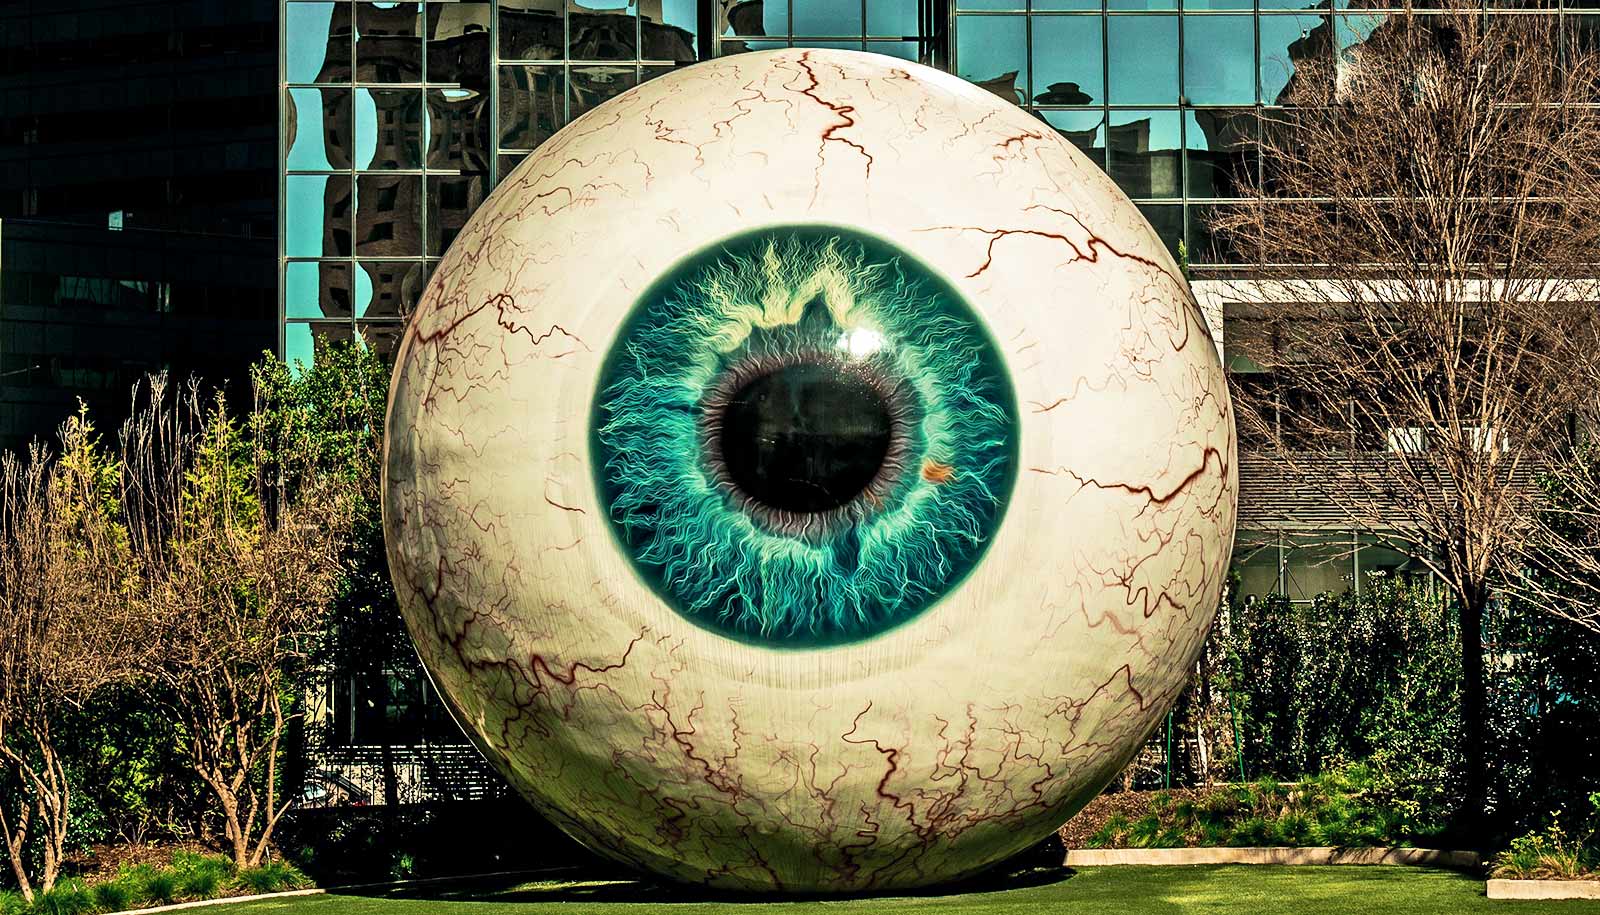 A large eyeball art installation in a park in front of an office building.